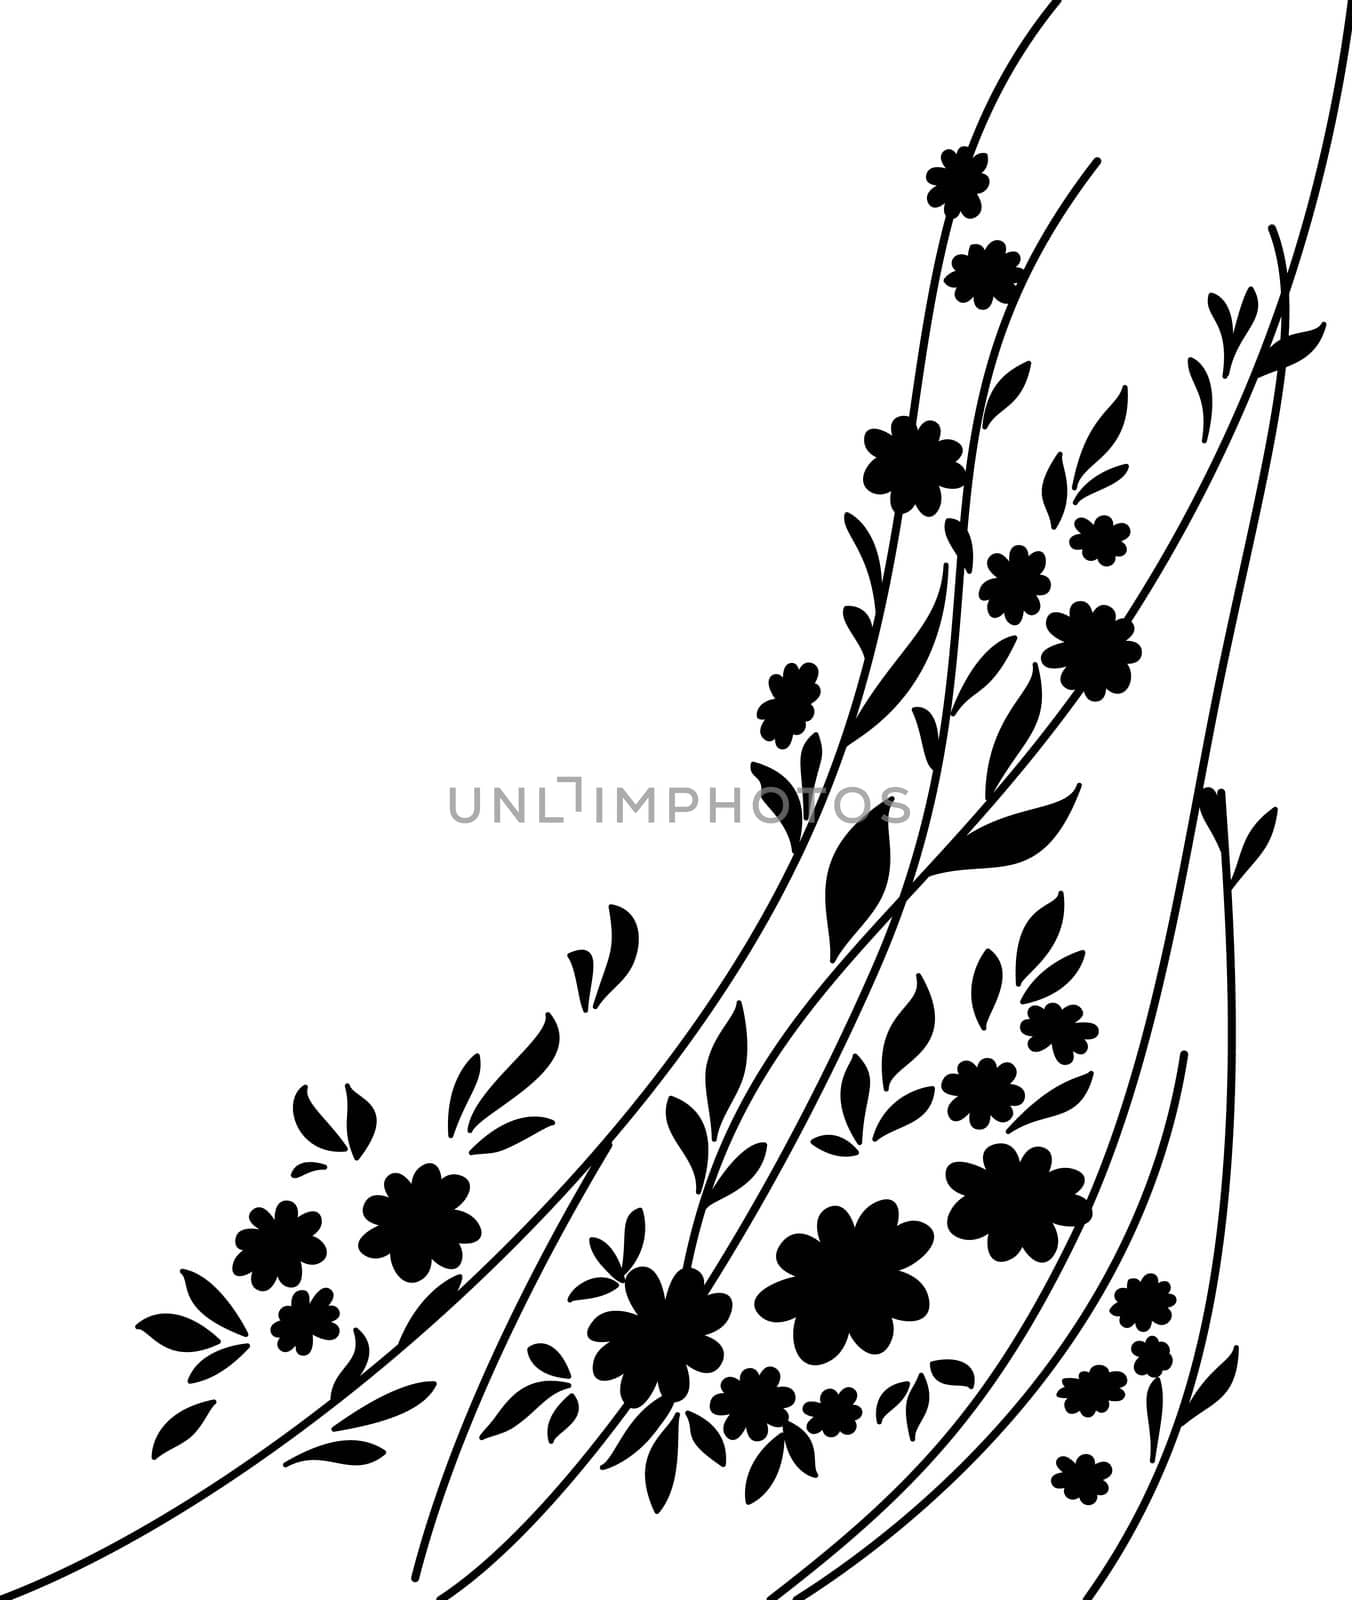 Abstract floral pattern. Black silhouettes on white background